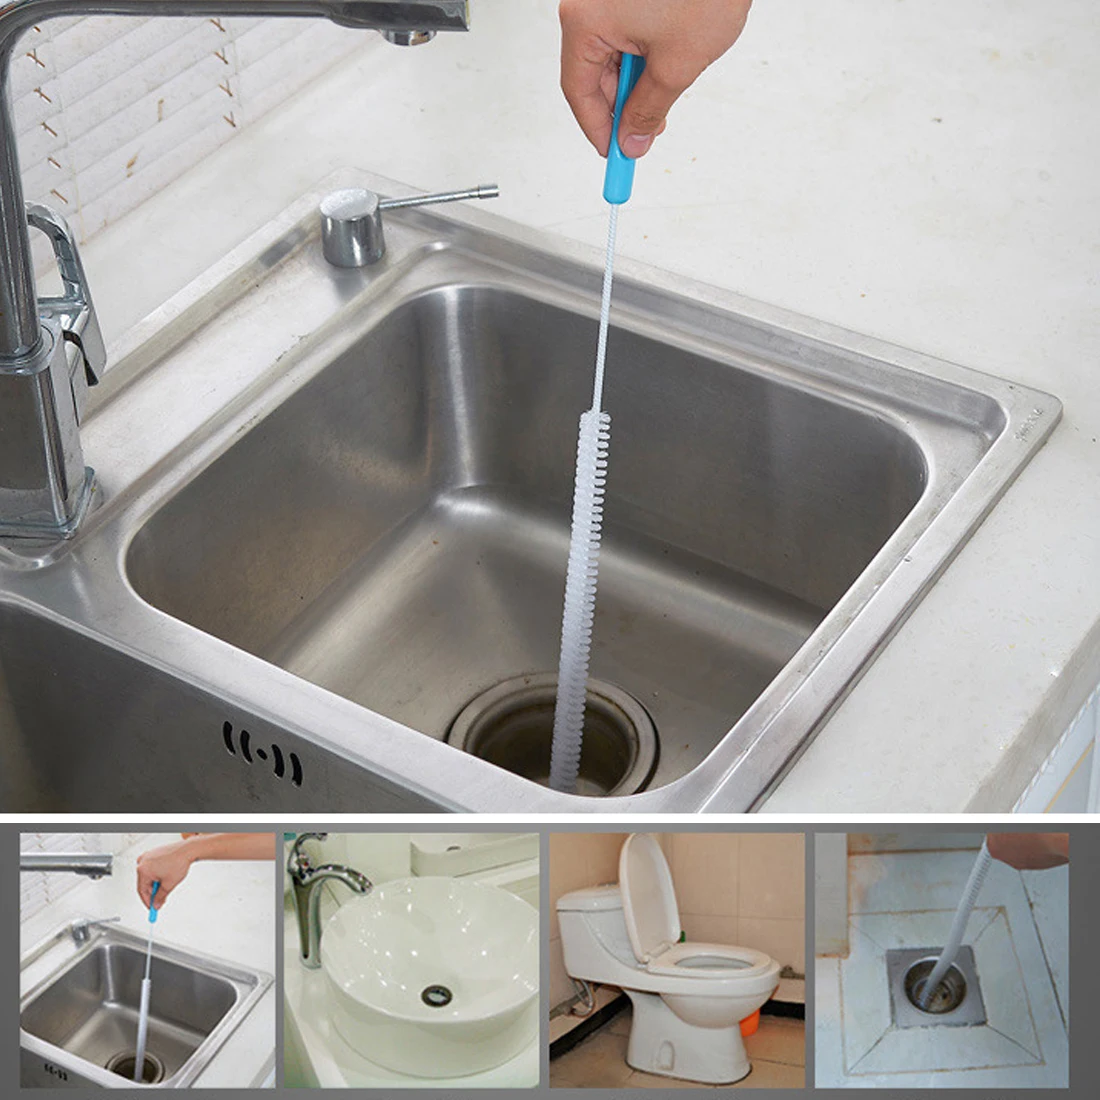 Us 1 94 21 Off Home Bendable Sink Tub Toilet Dredge Pipe Snake Brush Tools Sewer Cleaning Brush Creative Bathroom Kitchen Accessories In Drain